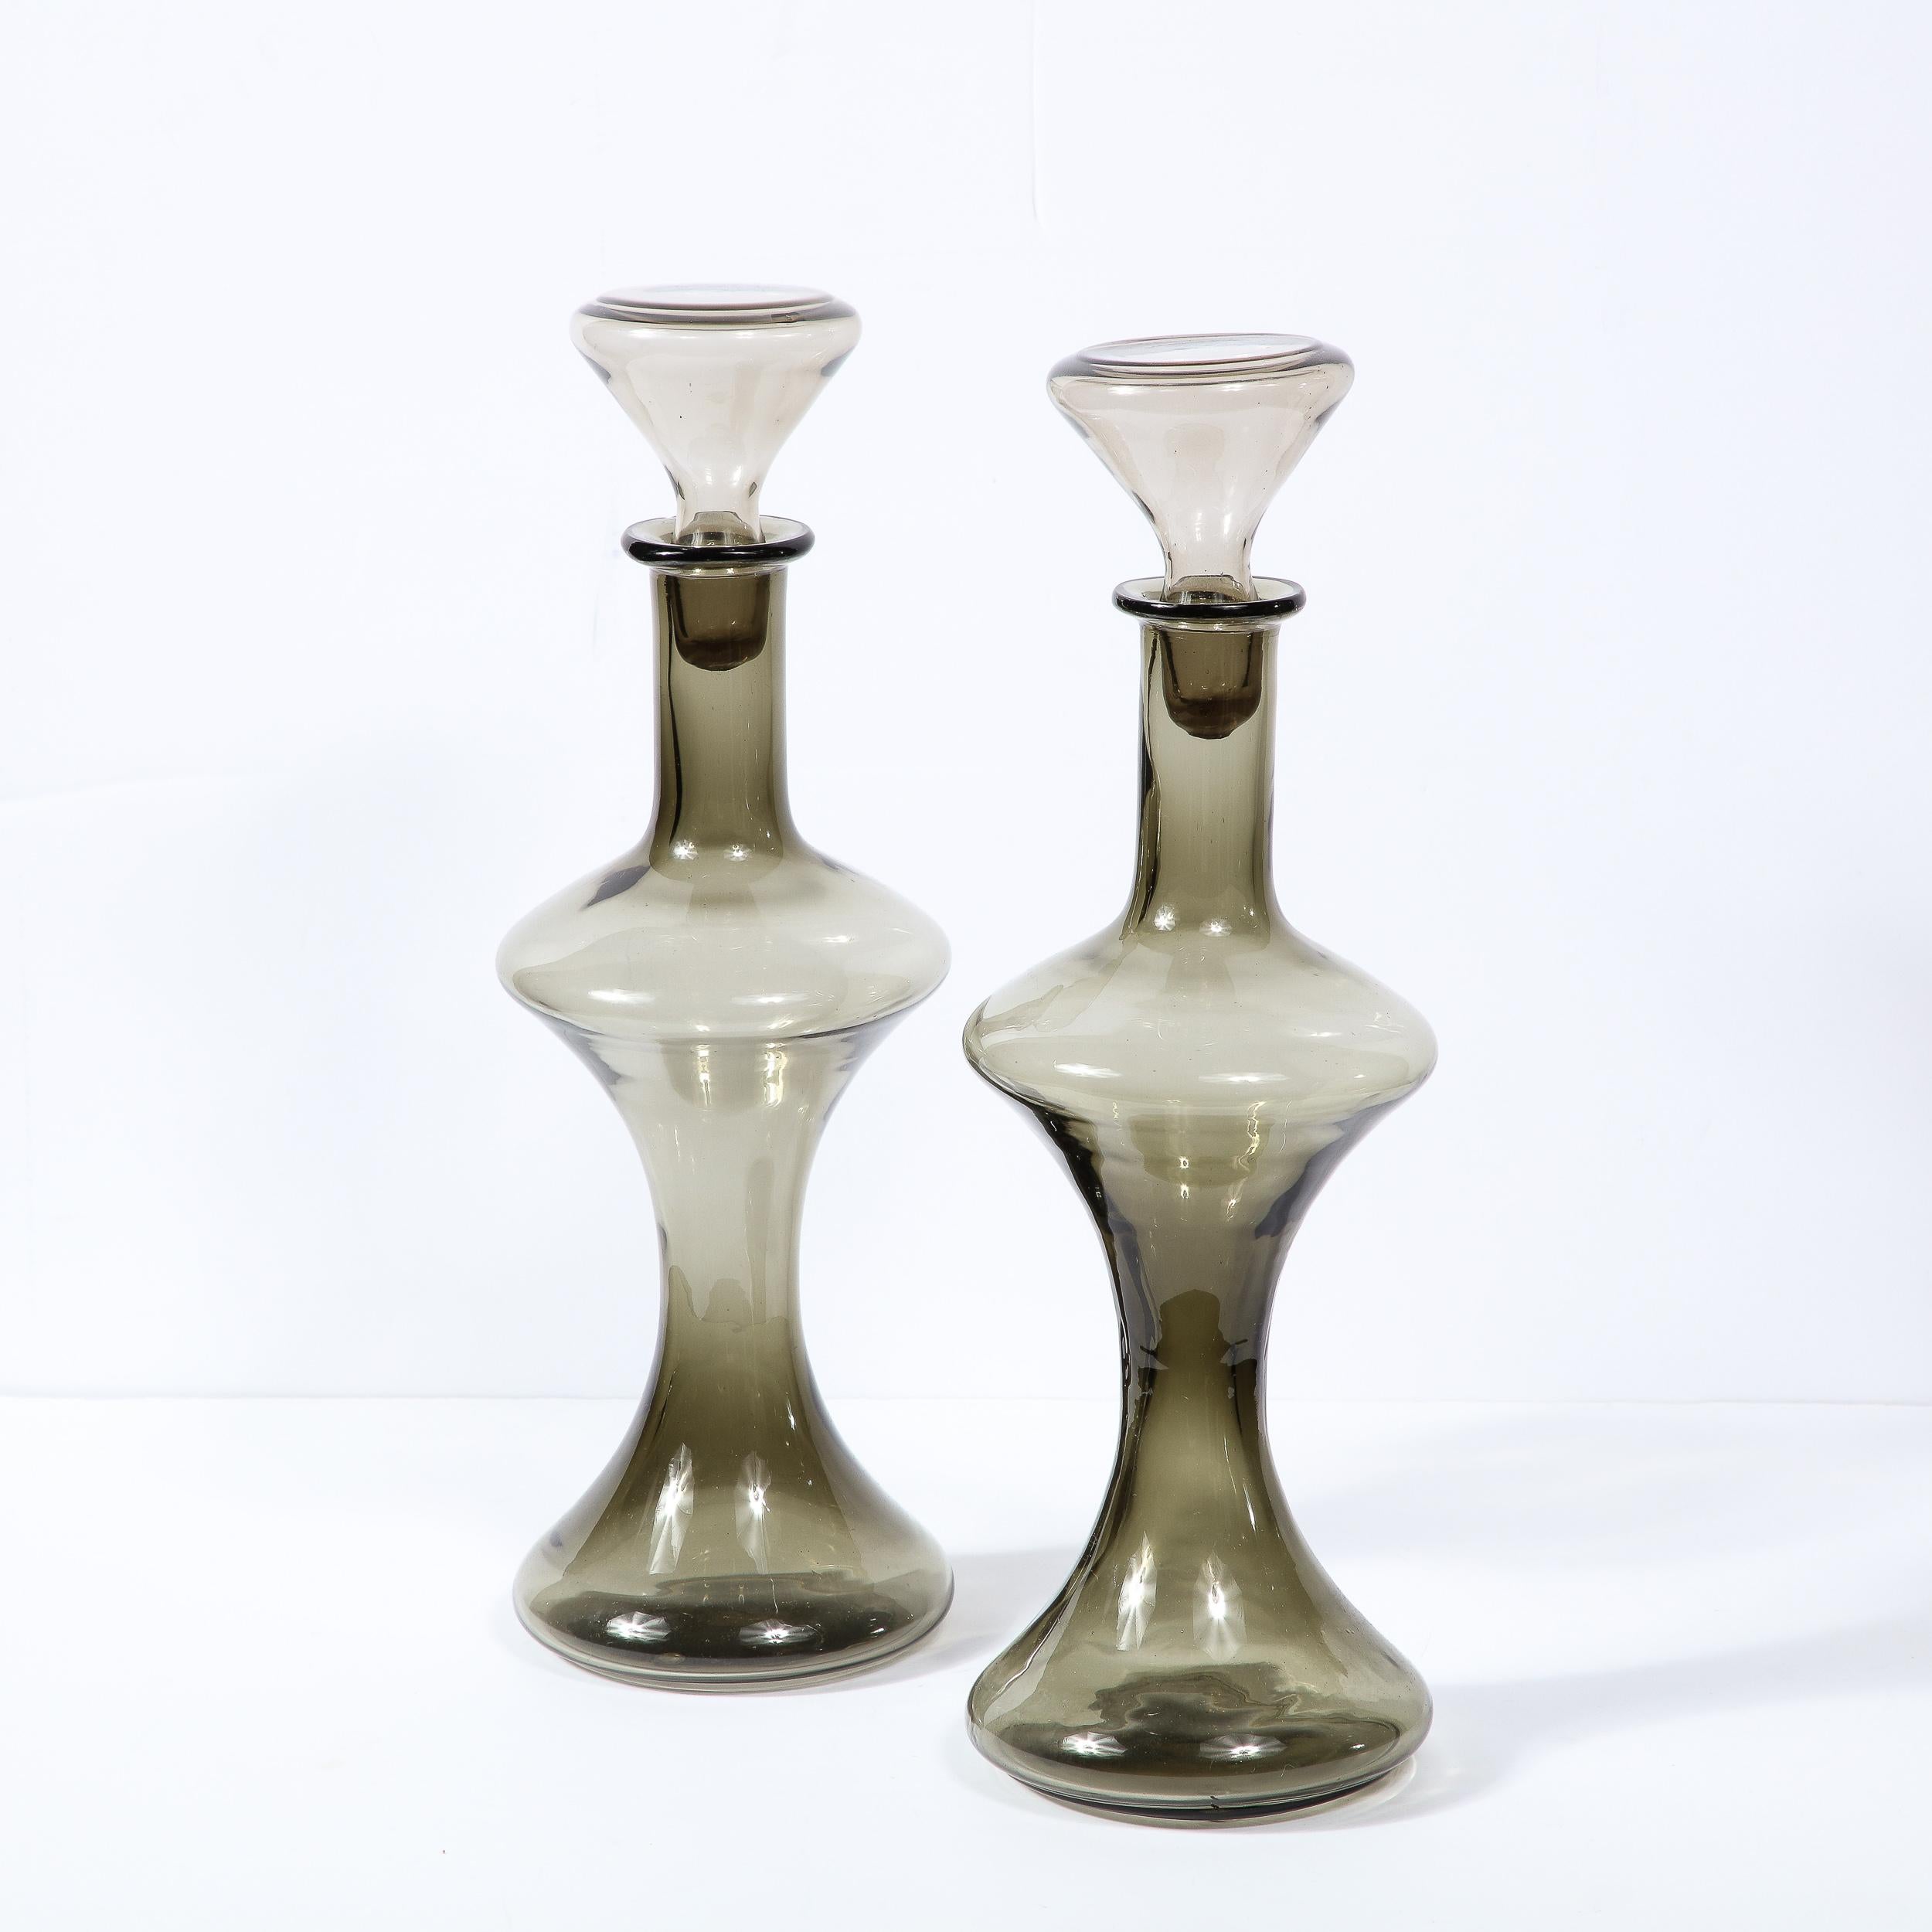 This stunning pair of Mid-Century Modern decanters were realized in Murano, Italy- the island off the coast of Venice renowned for centuries for its superlative glass production. They feature sinuously curved and undulating bodies in a sultry